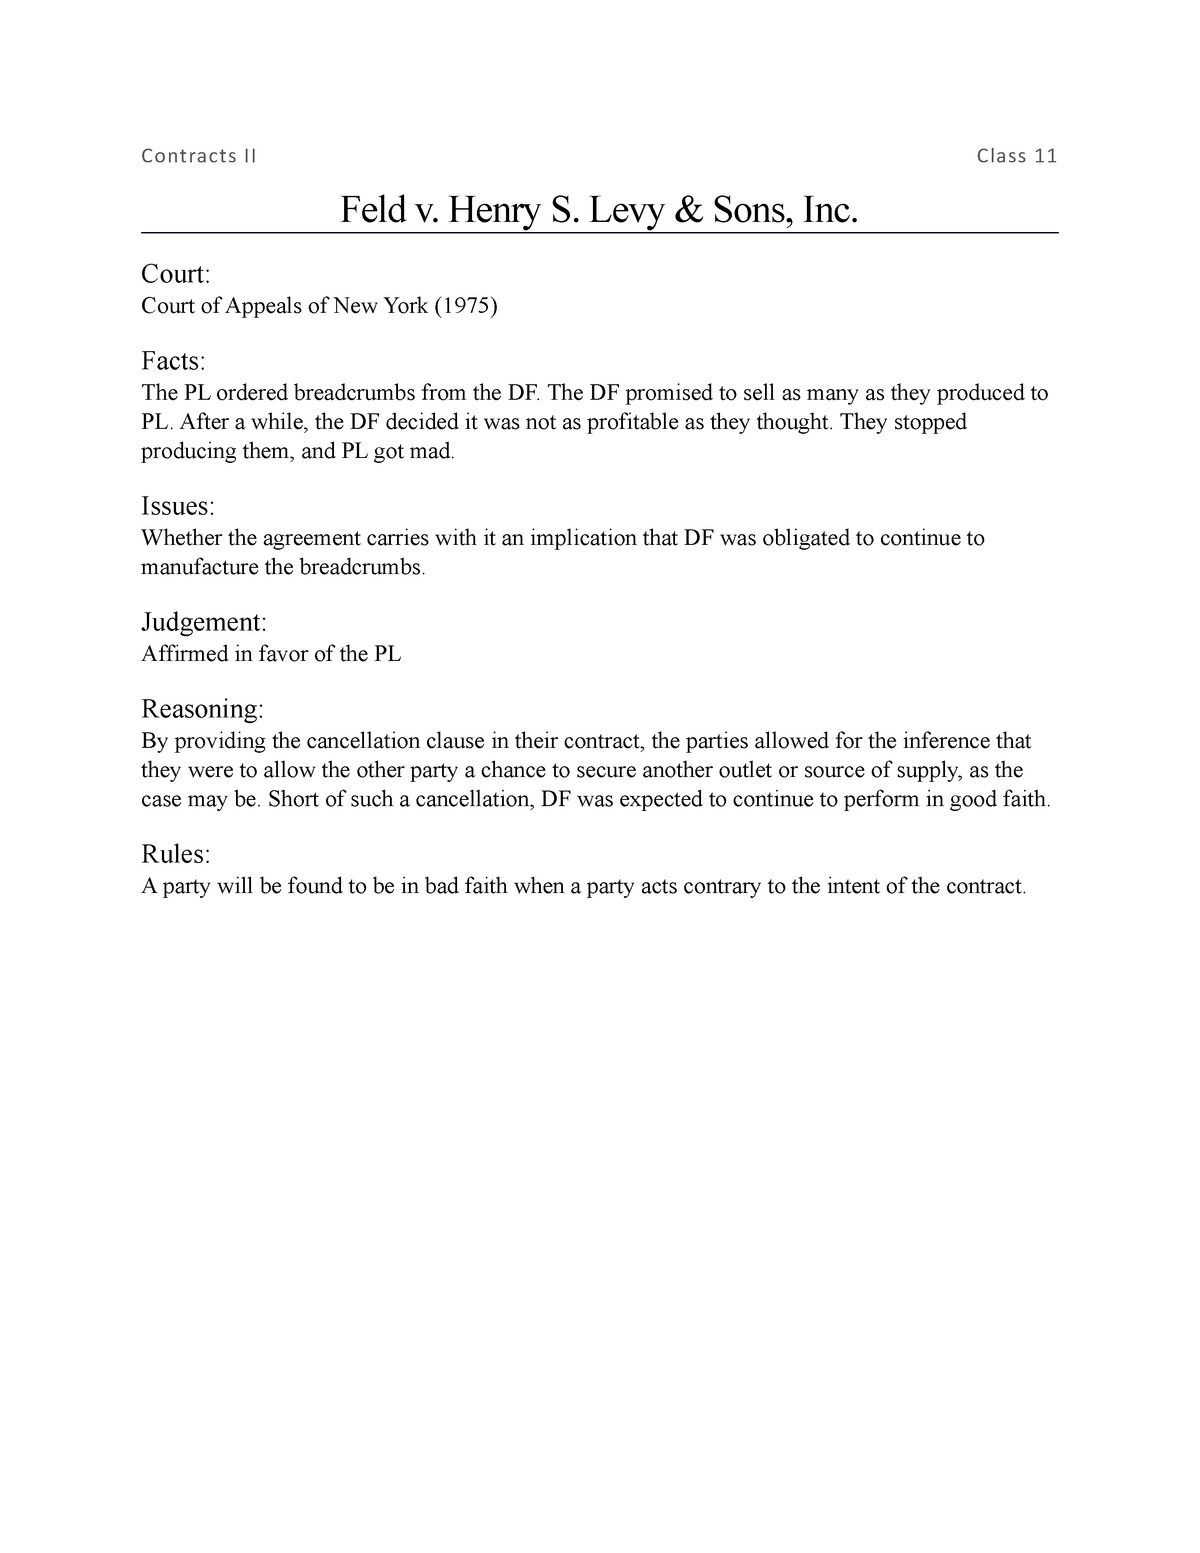 Feld v. Henry S. Levy & Sons, Inc. - Contracts II Class 11 Feld v. Henry S.  Levy & Sons, Inc. - Studocu